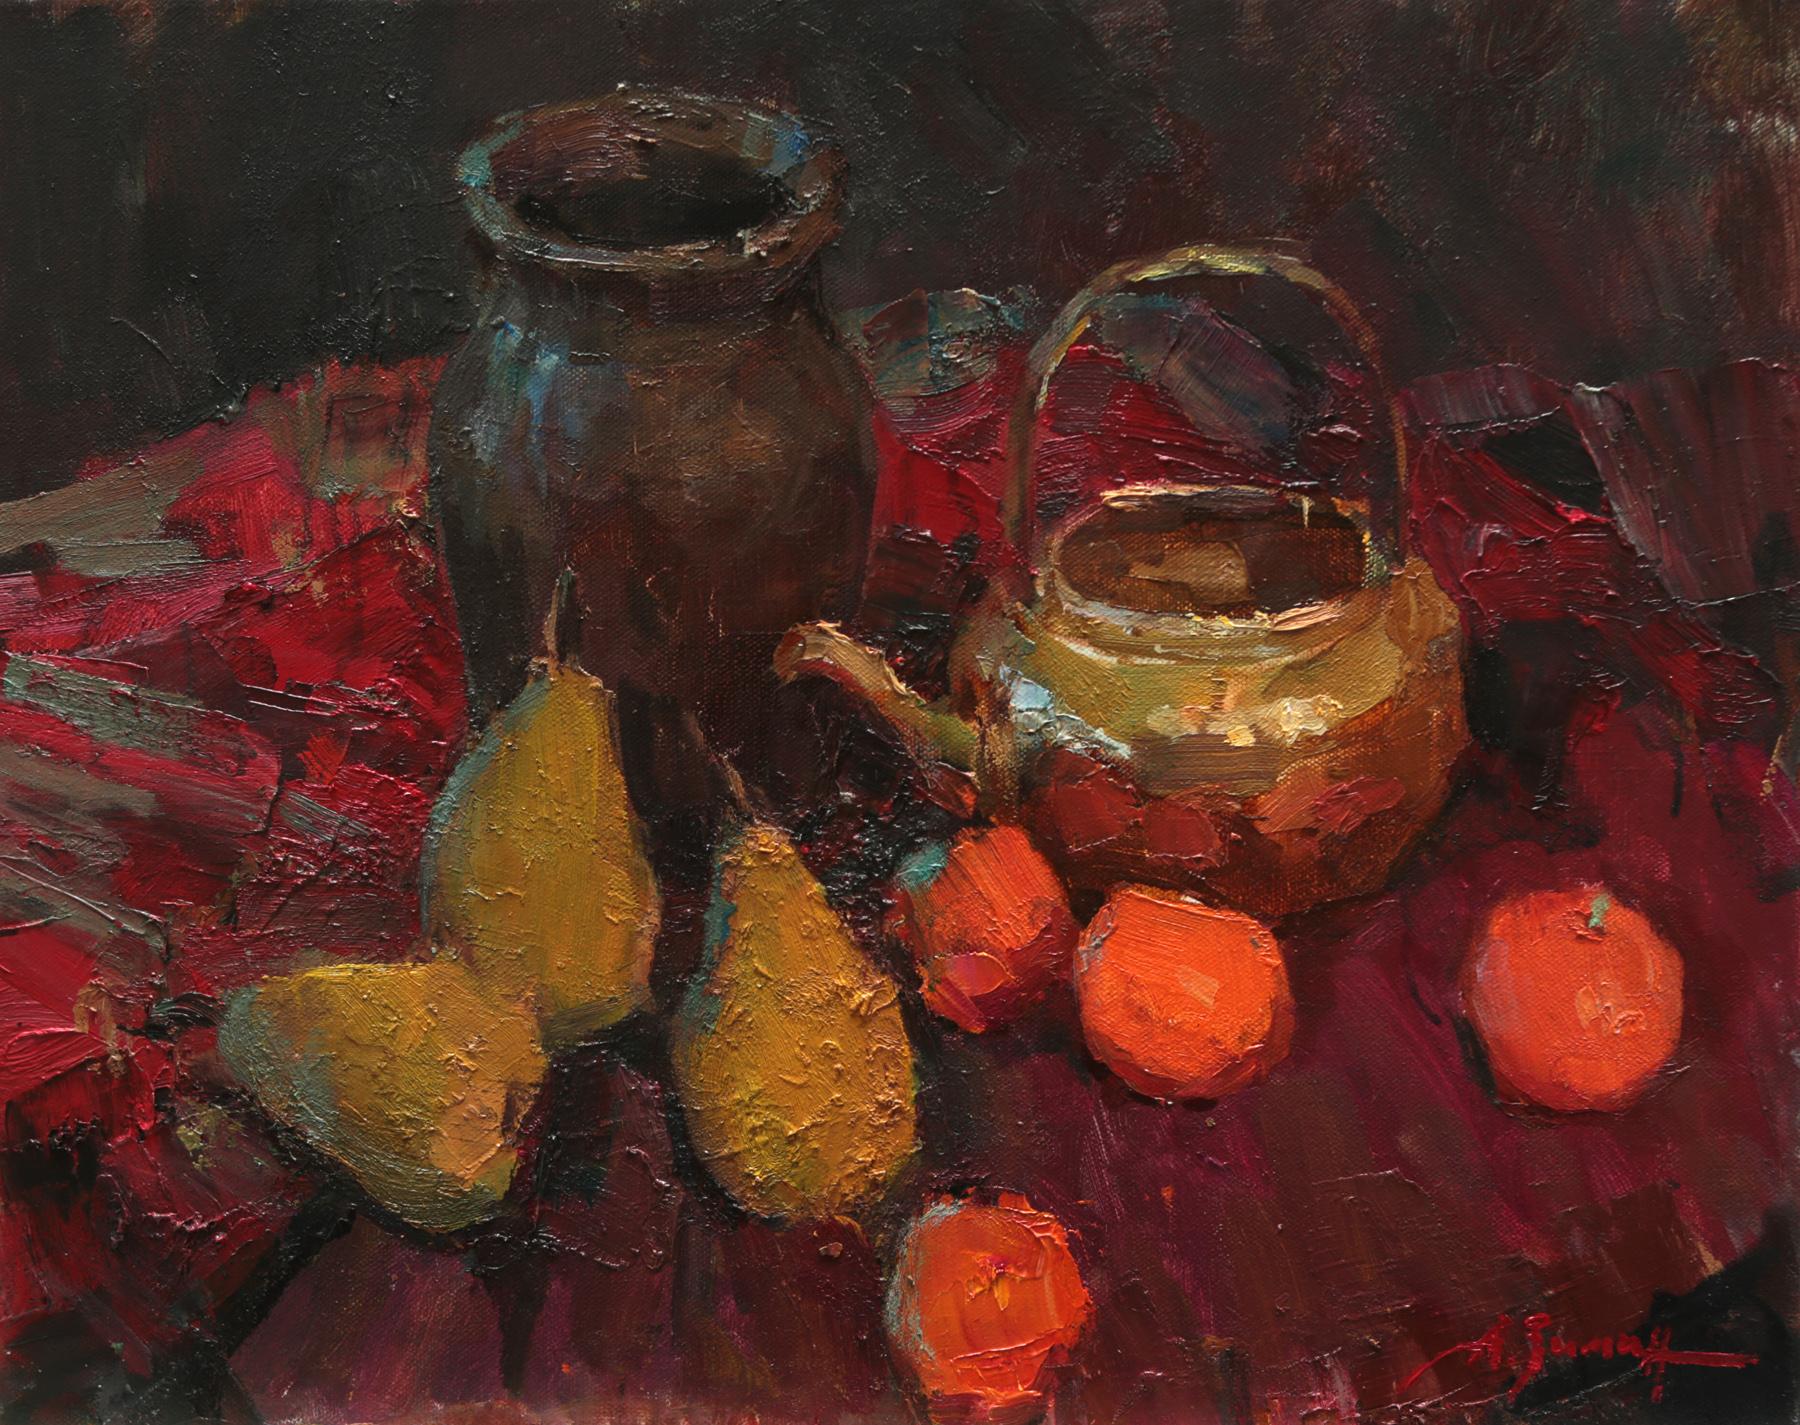 Fruits on the red table